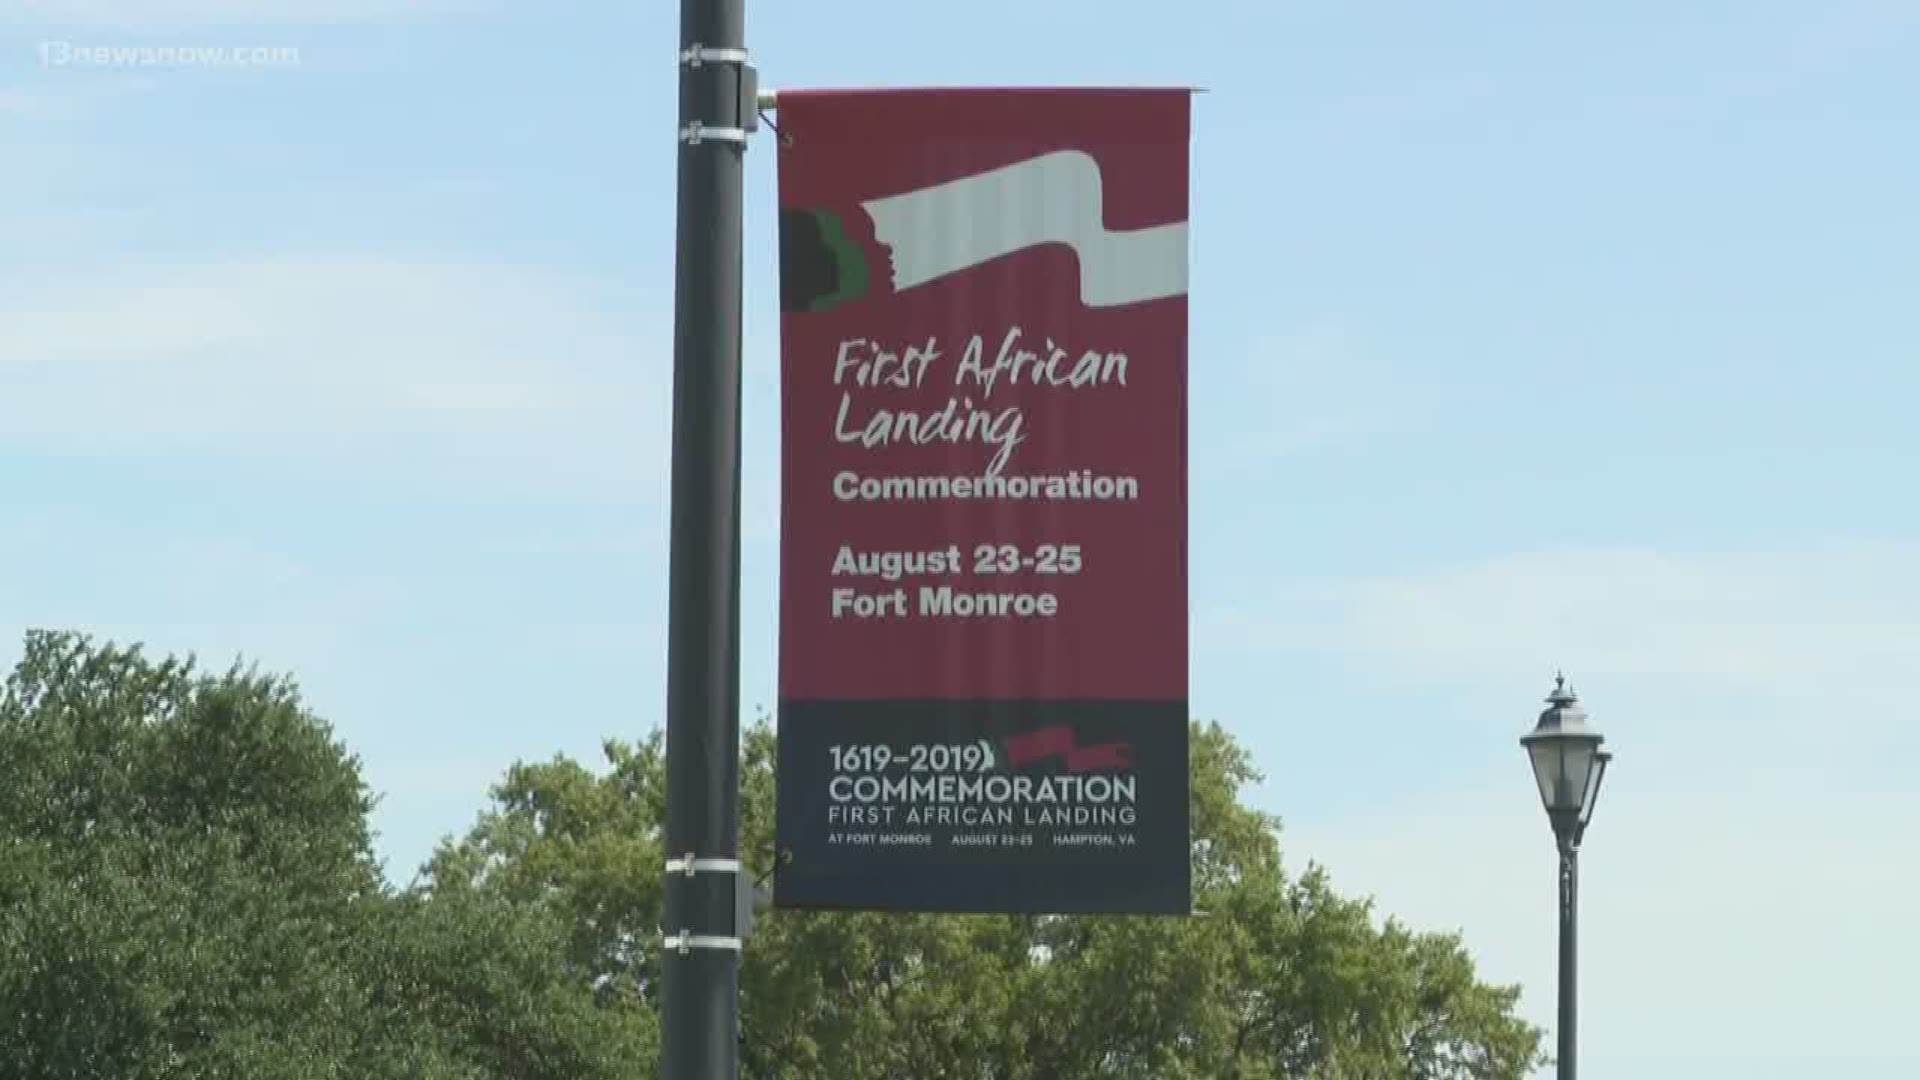 In 1619, the first documented Africans arrived in English North America at Fort Monroe. Hampton is holding a ceremony to commemorate the 400th anniversary.